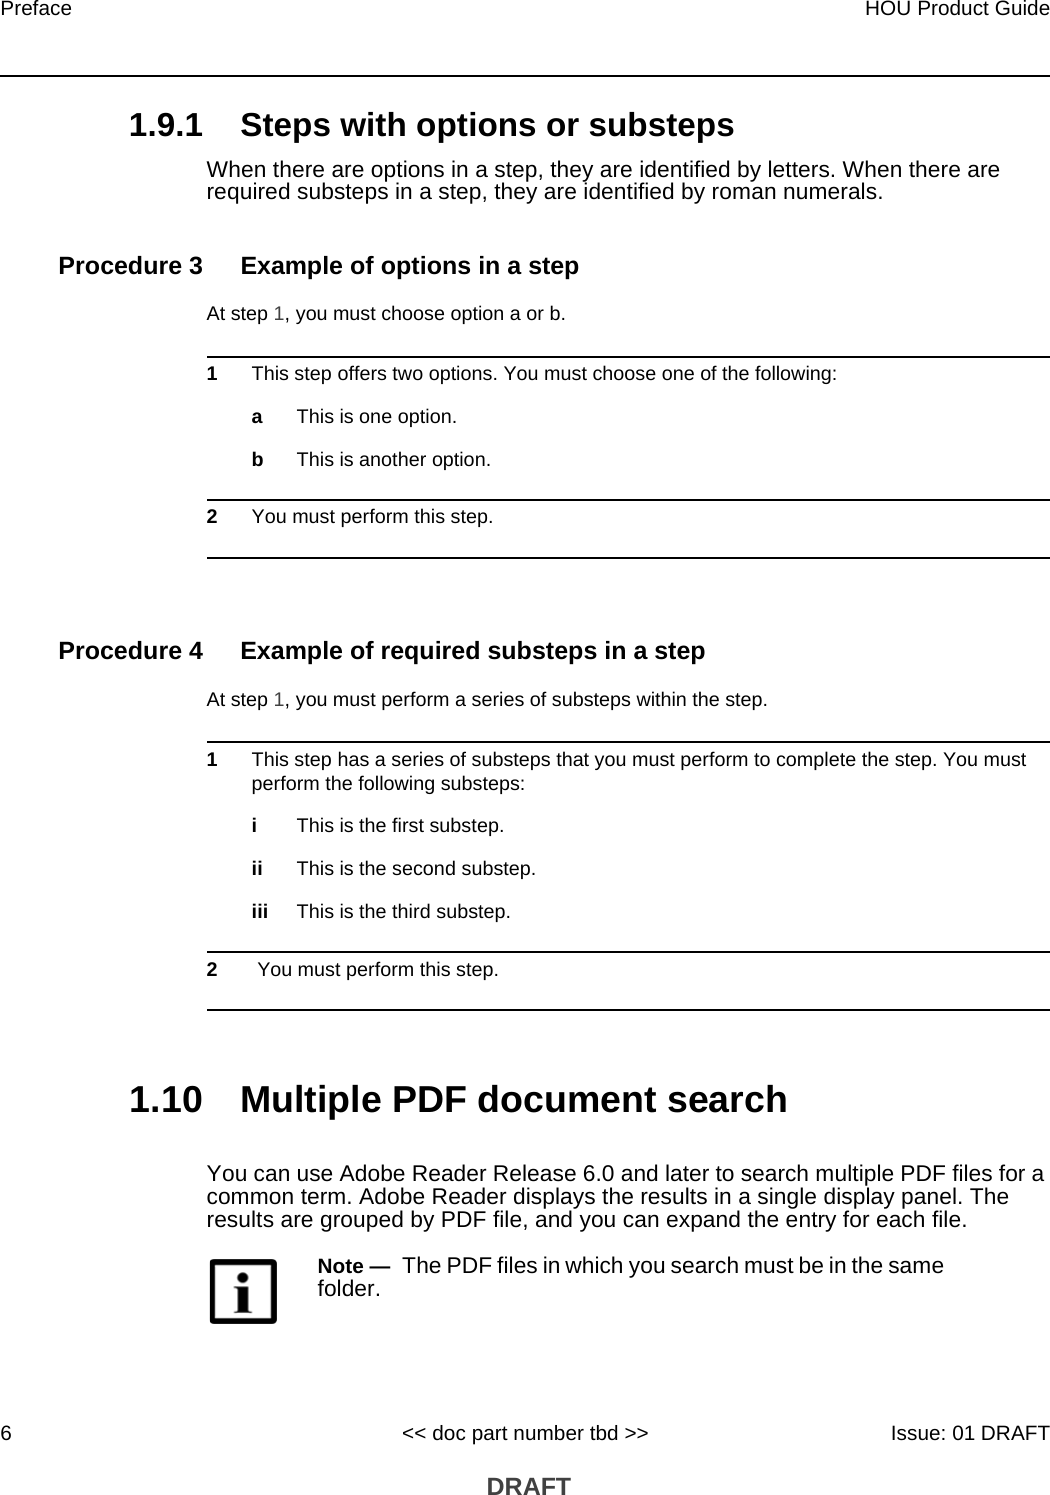 Preface6HOU Product Guide&lt;&lt; doc part number tbd &gt;&gt; Issue: 01 DRAFT DRAFT1.9.1 Steps with options or substepsWhen there are options in a step, they are identified by letters. When there are required substeps in a step, they are identified by roman numerals.Procedure 3 Example of options in a stepAt step 1, you must choose option a or b. 1This step offers two options. You must choose one of the following:aThis is one option.bThis is another option.2You must perform this step.Procedure 4 Example of required substeps in a stepAt step 1, you must perform a series of substeps within the step. 1This step has a series of substeps that you must perform to complete the step. You must perform the following substeps:iThis is the first substep.ii This is the second substep.iii This is the third substep.2 You must perform this step.1.10 Multiple PDF document searchYou can use Adobe Reader Release 6.0 and later to search multiple PDF files for a common term. Adobe Reader displays the results in a single display panel. The results are grouped by PDF file, and you can expand the entry for each file.Note —  The PDF files in which you search must be in the same folder.